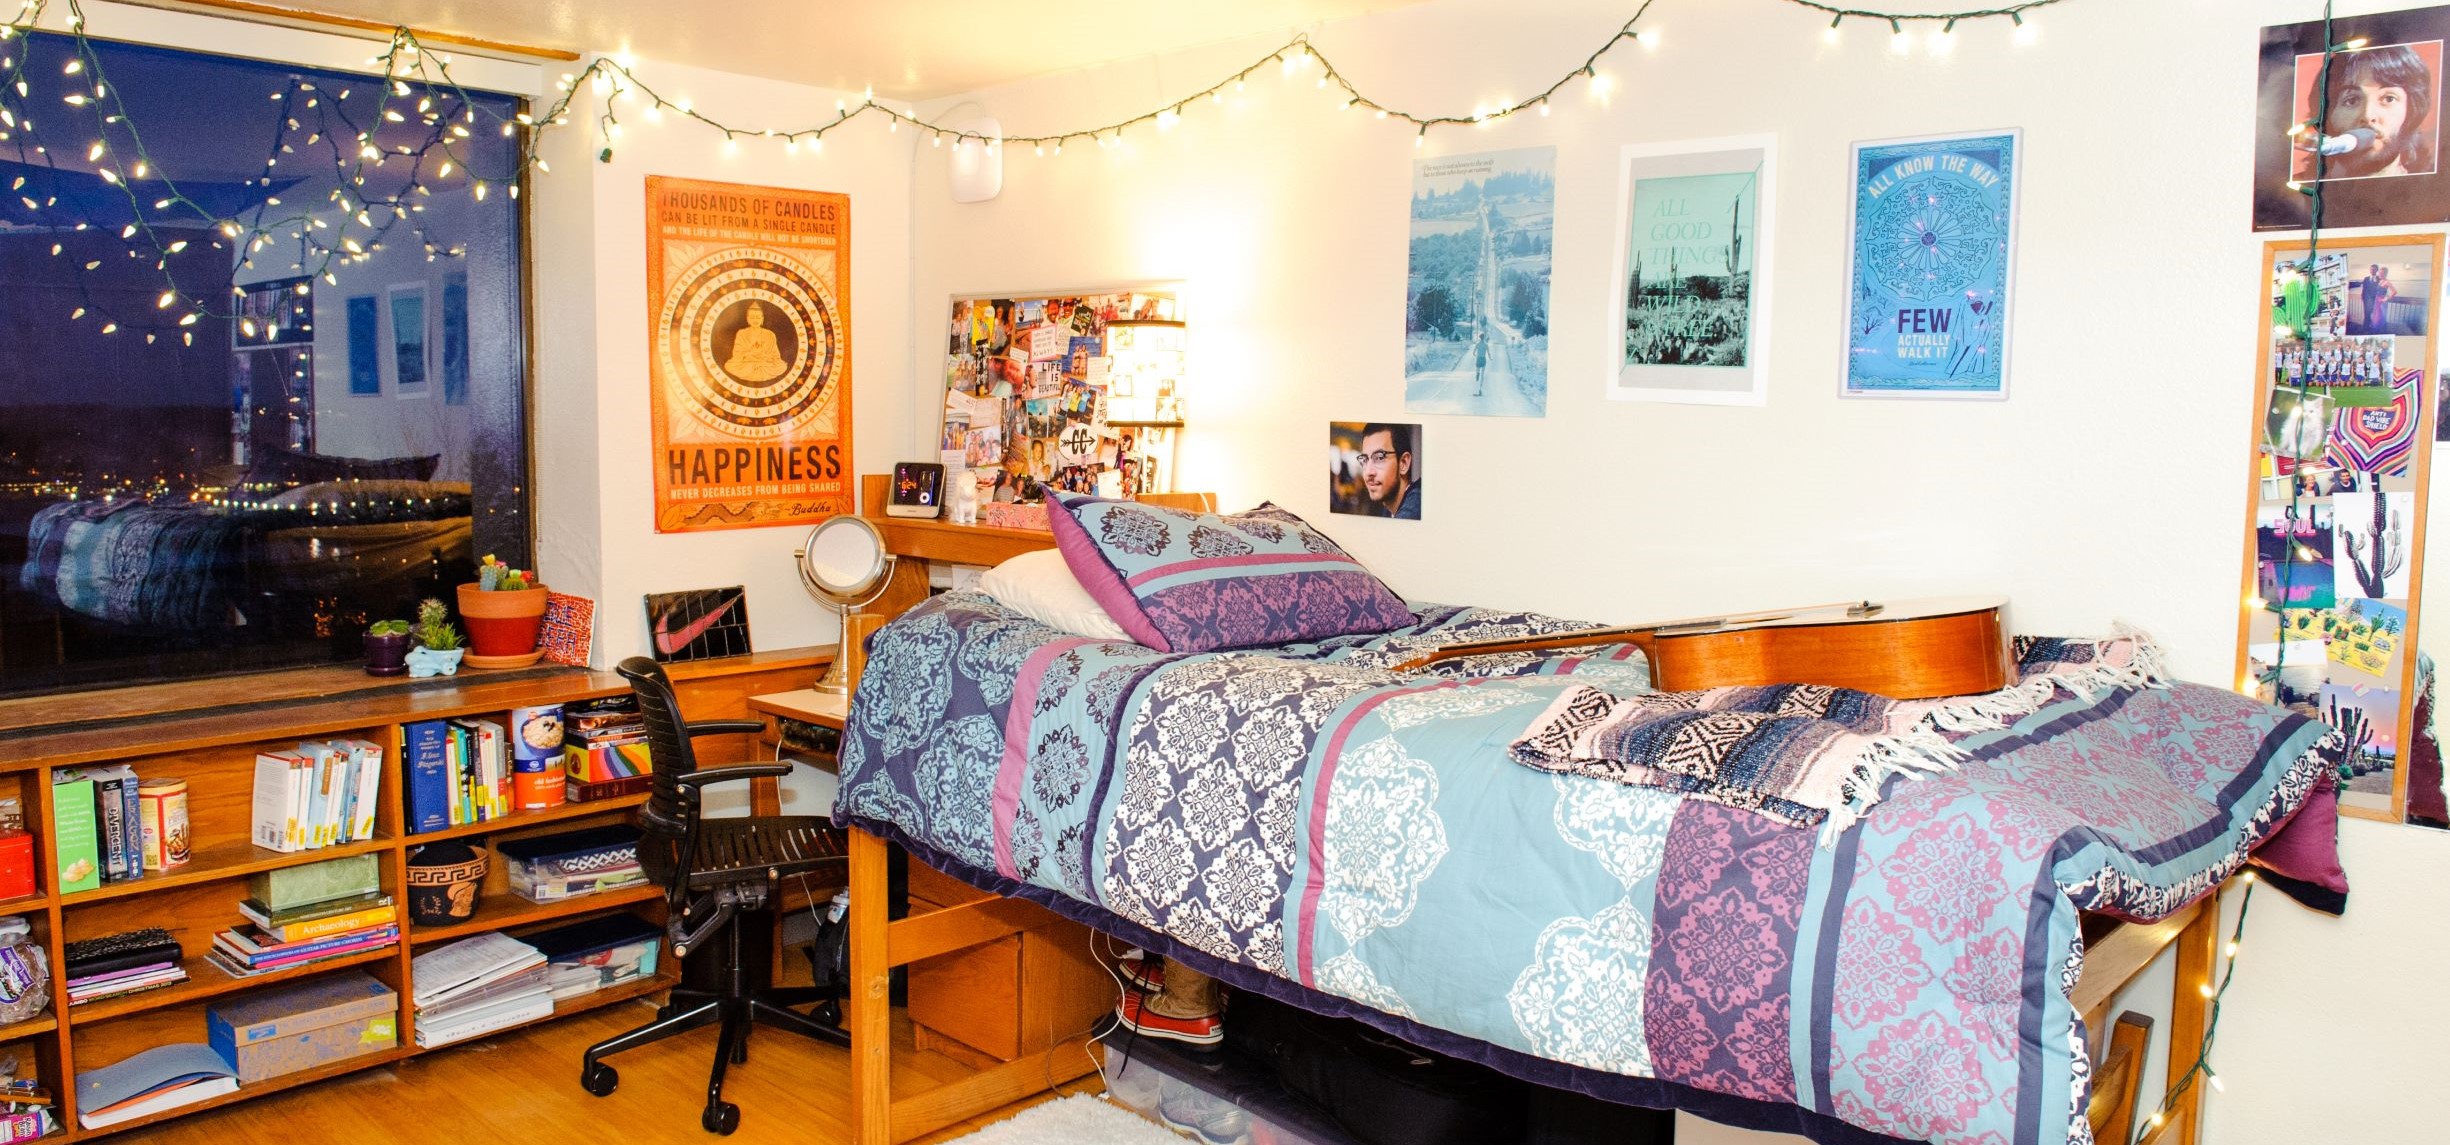 One side of a dorm room with essentials and decorations